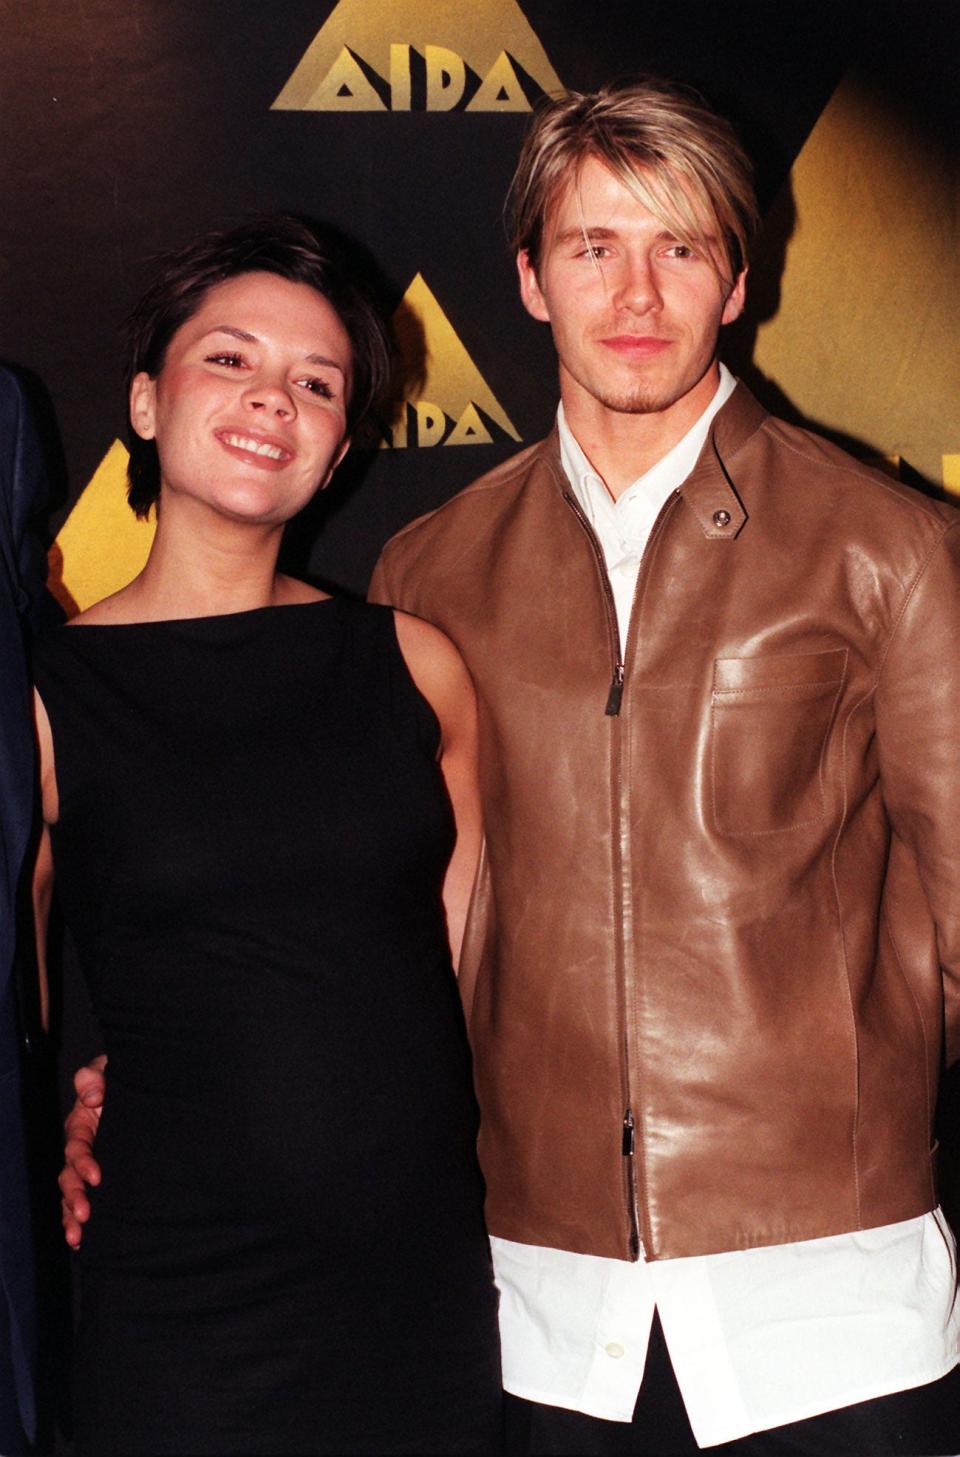 Victoria and David Beckham attend the launch of the Aida project, a Disney stage musical written by Elton John and Tim Rice, on January 26, 1999.